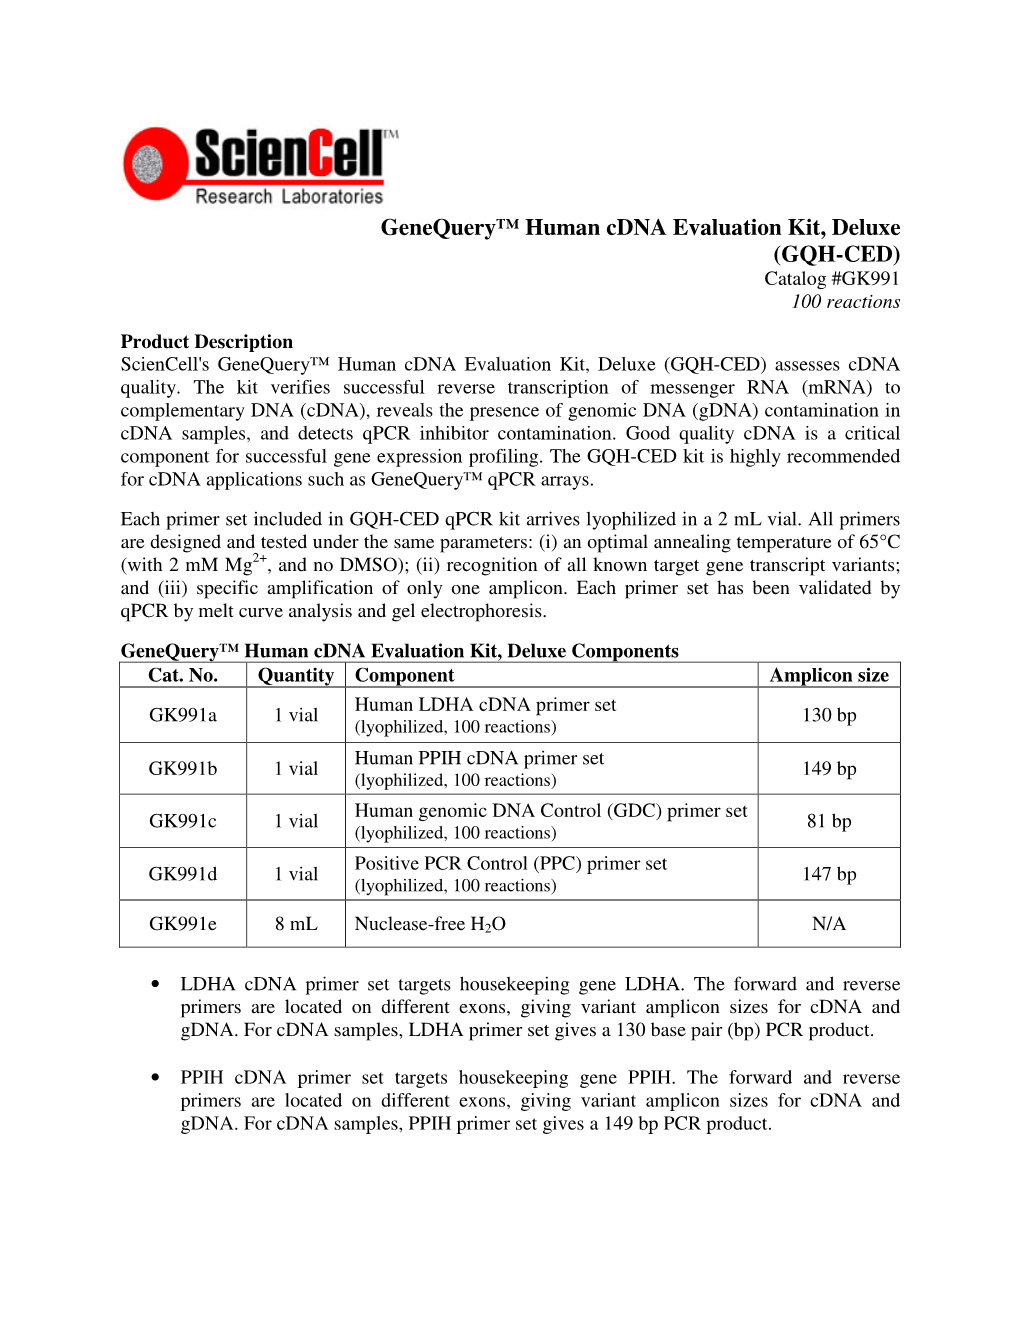 Genequery™ Human Cdna Evaluation Kit, Deluxe (GQH-CED) Catalog #GK991 100 Reactions